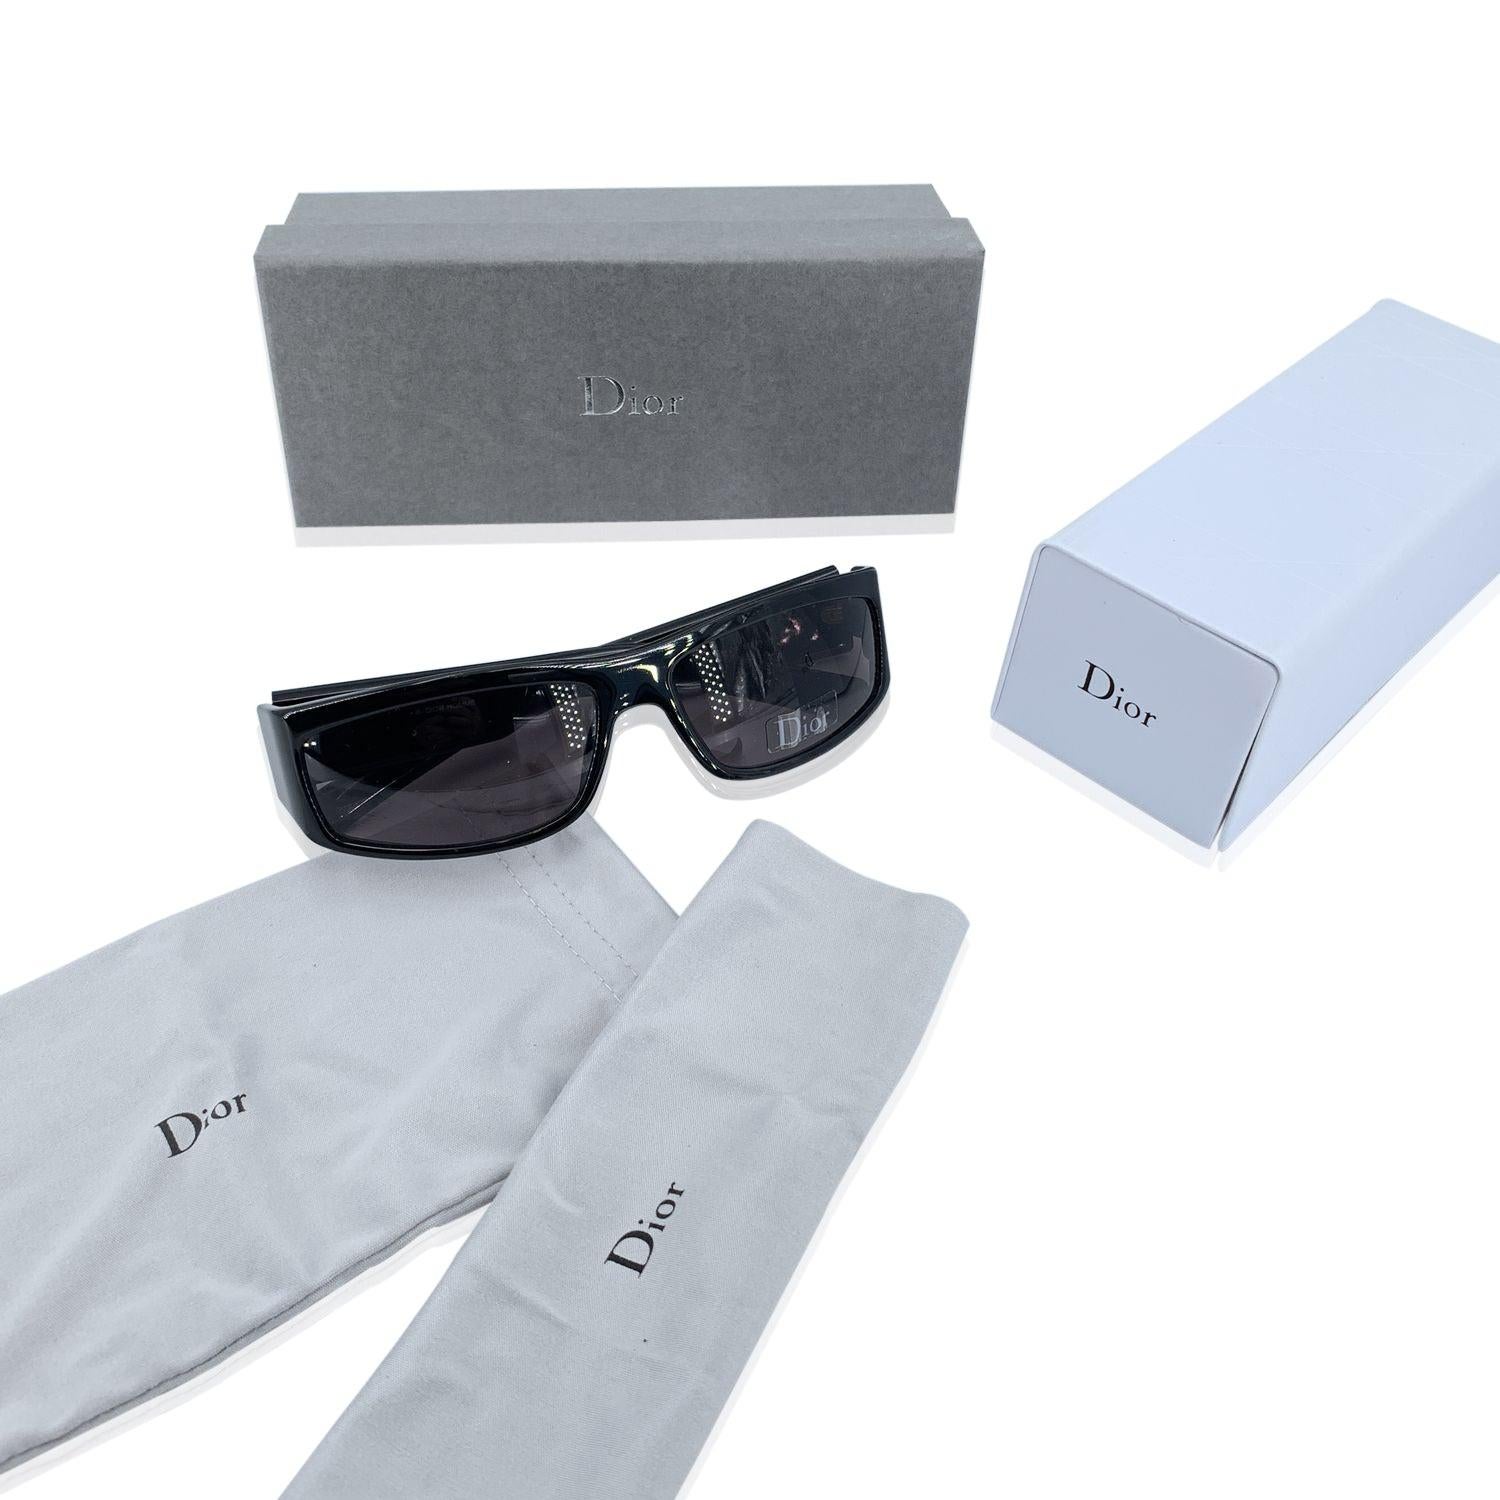 CHRISTIAN DIOR HOMME 'Black Tie' Sunglasses,mod. 5/S - 807 N. Size 59/15 125mm. Black acetate frame, sides with gold metal stripes on ear stems. 100% Total UVA/UVB protection grey lenses. Made in Italy. Details MATERIAL: Plastic COLOR: Black MODEL: